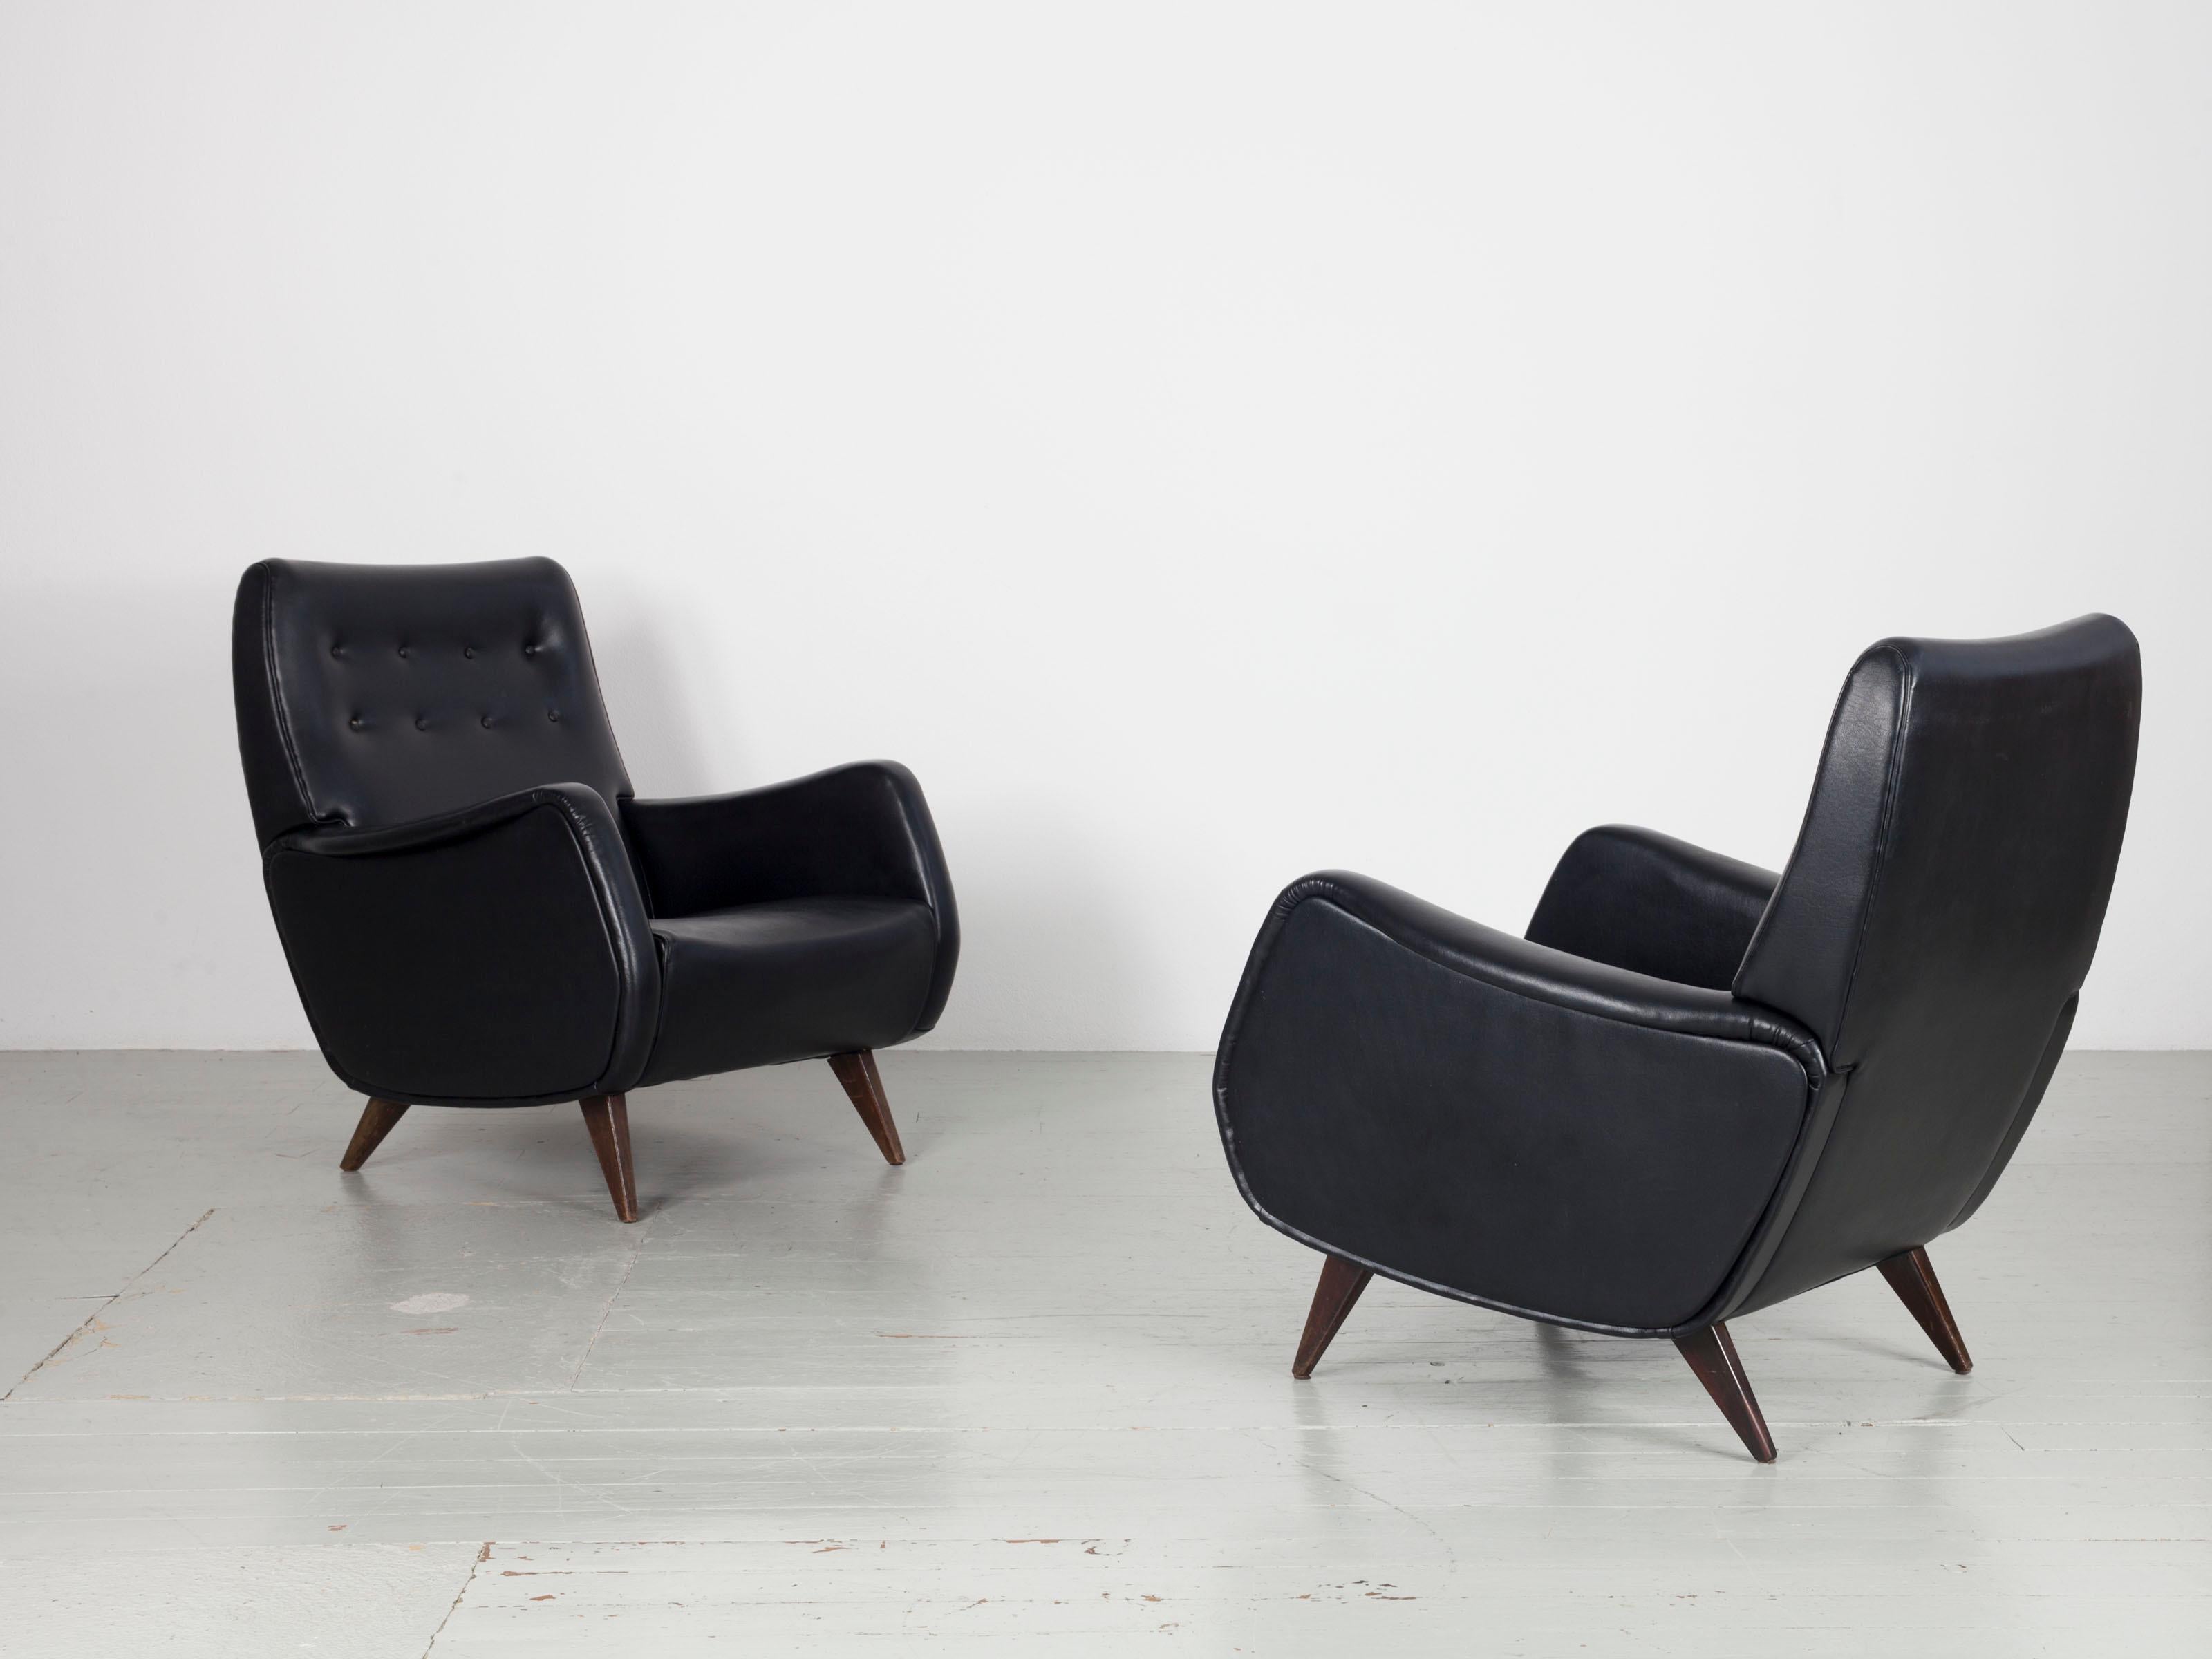 Set of Two Italian Armchairs in Original Black Leatherette Upholstery, 1950s For Sale